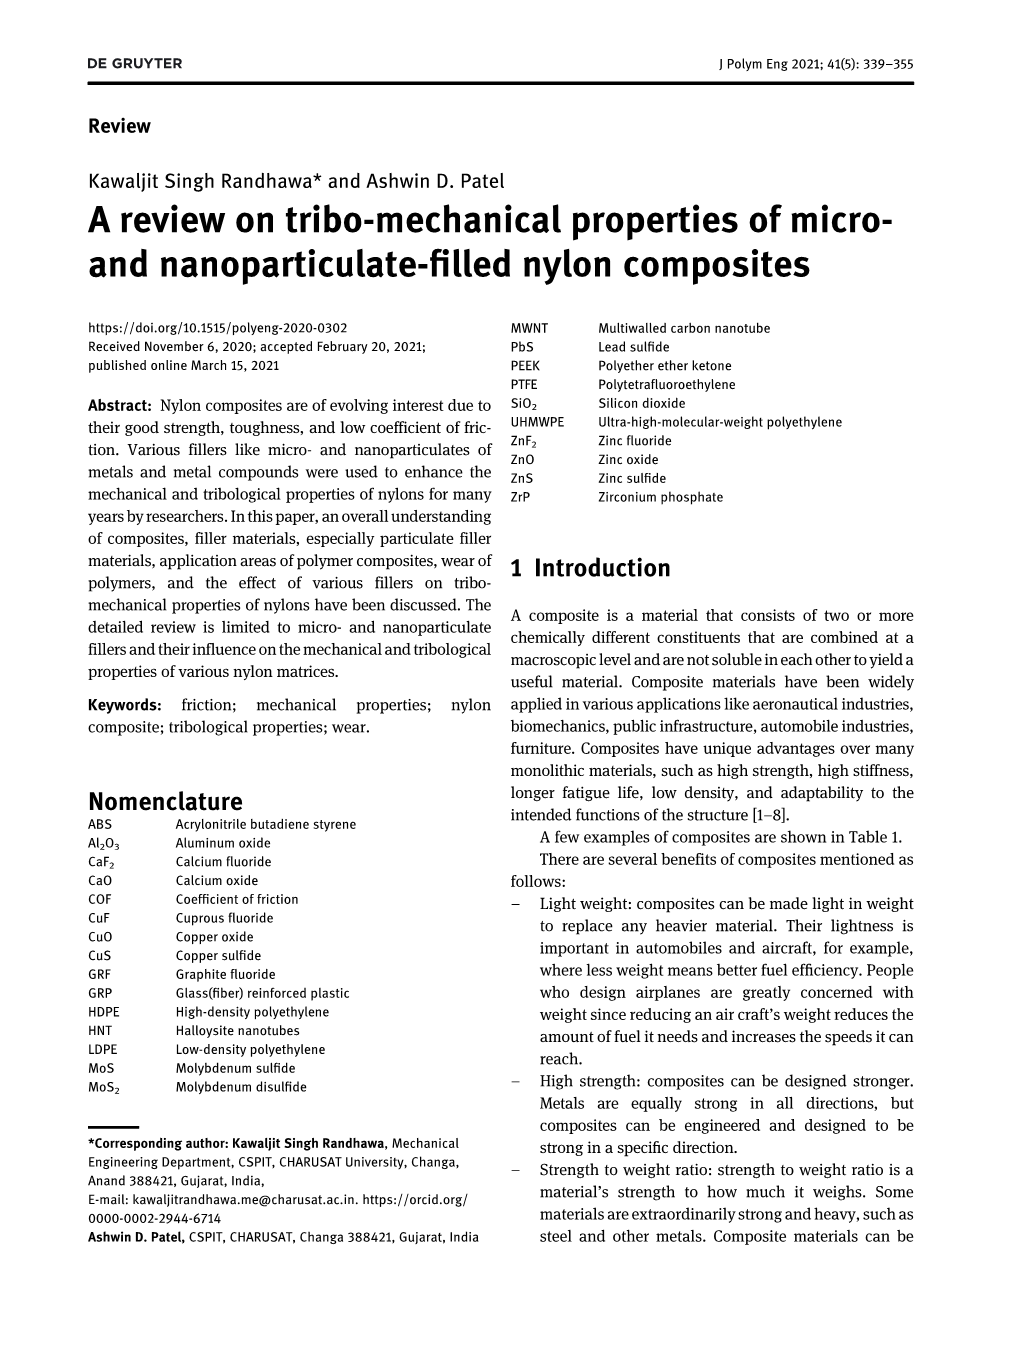 A Review on Tribo-Mechanical Properties of Micro-And